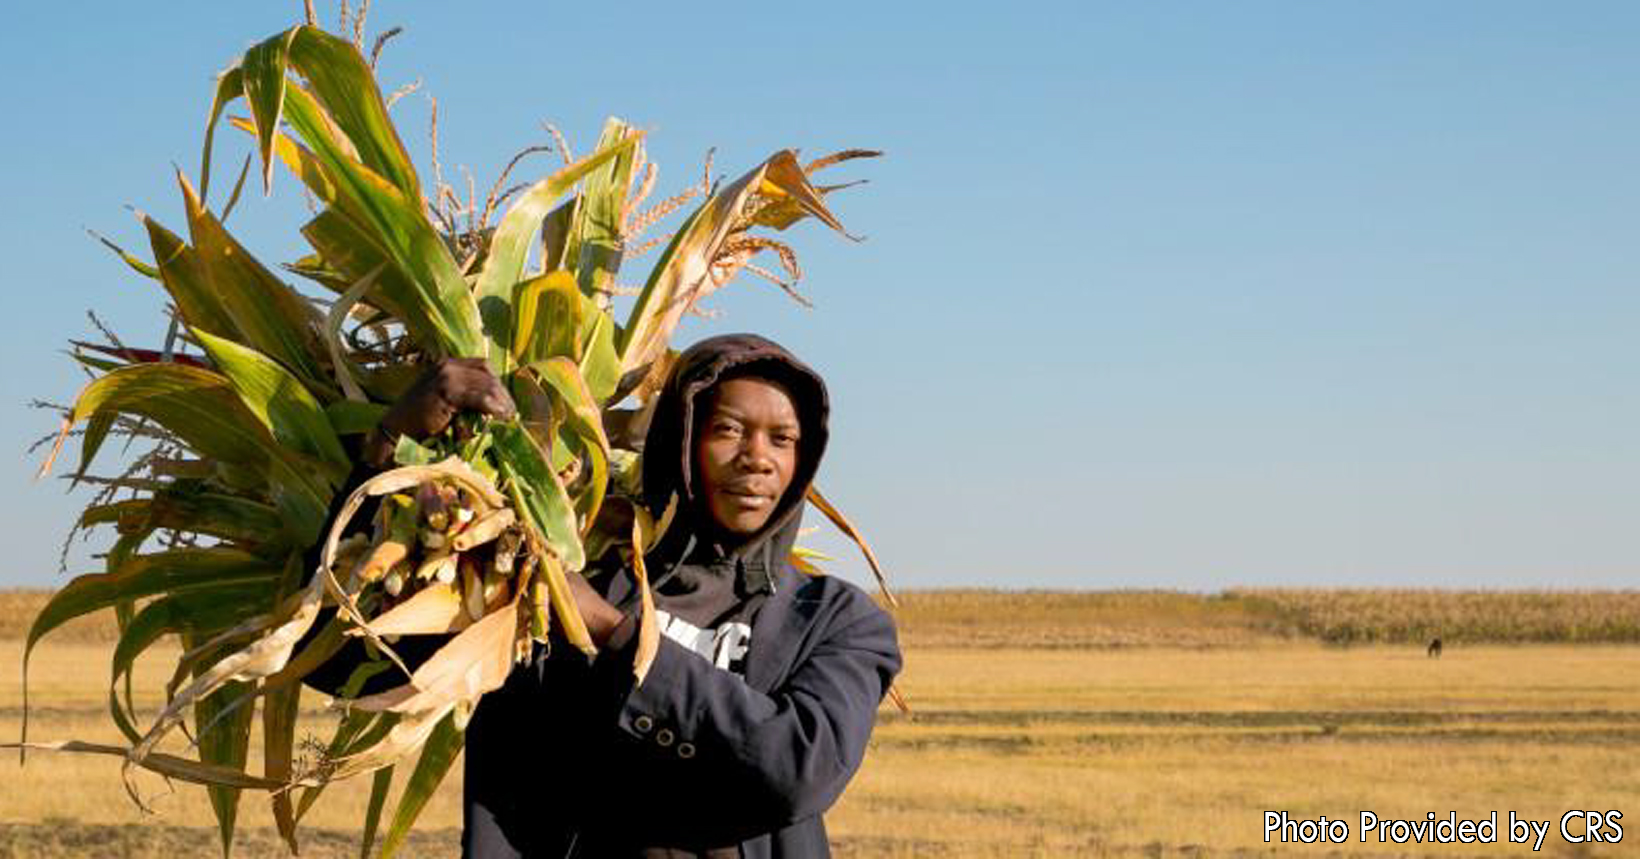 In Lesotho, some of the farmland is scarce and extra attention is needed. The CRS is helping farmers in Lesotho better manage the land. With the help, farmers are improving the amount of corn produced and reducing their livestock overgrazing.